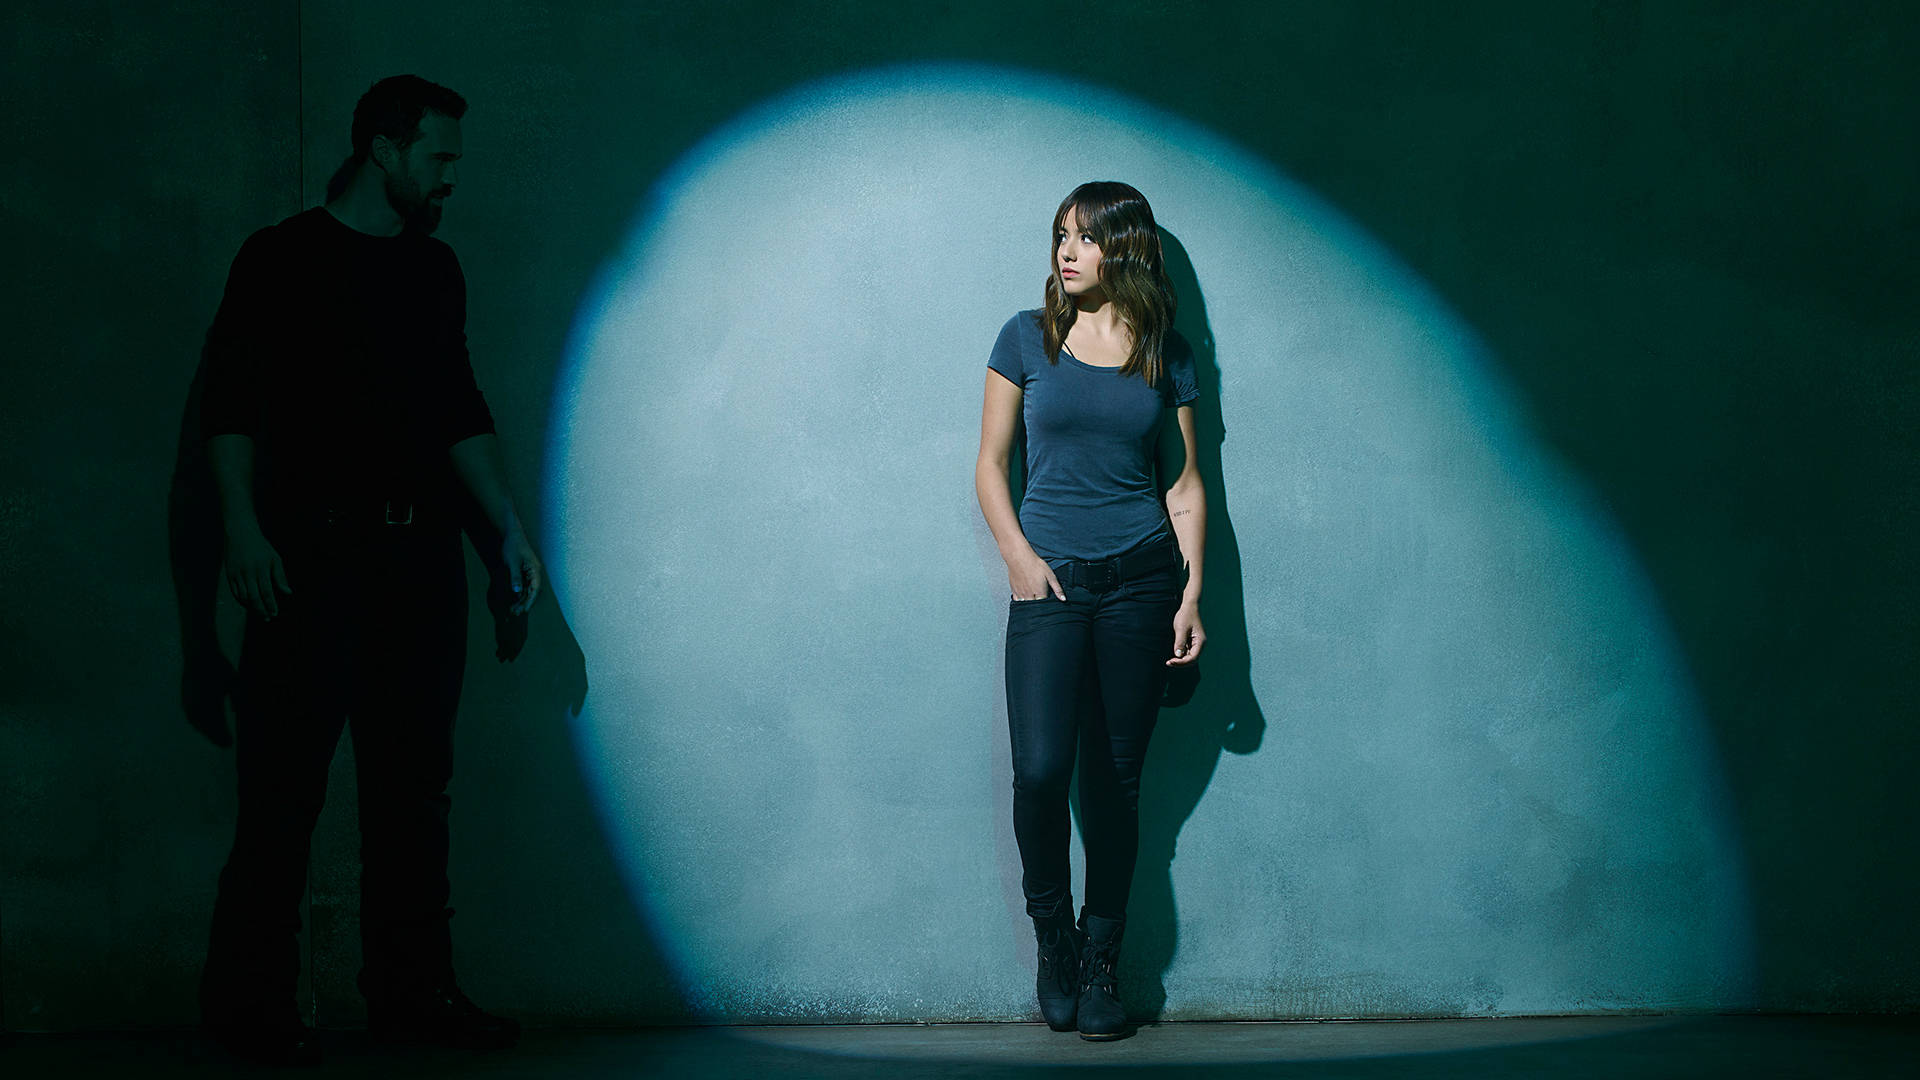 Agents Of Shield Skye And Grant Ward Background